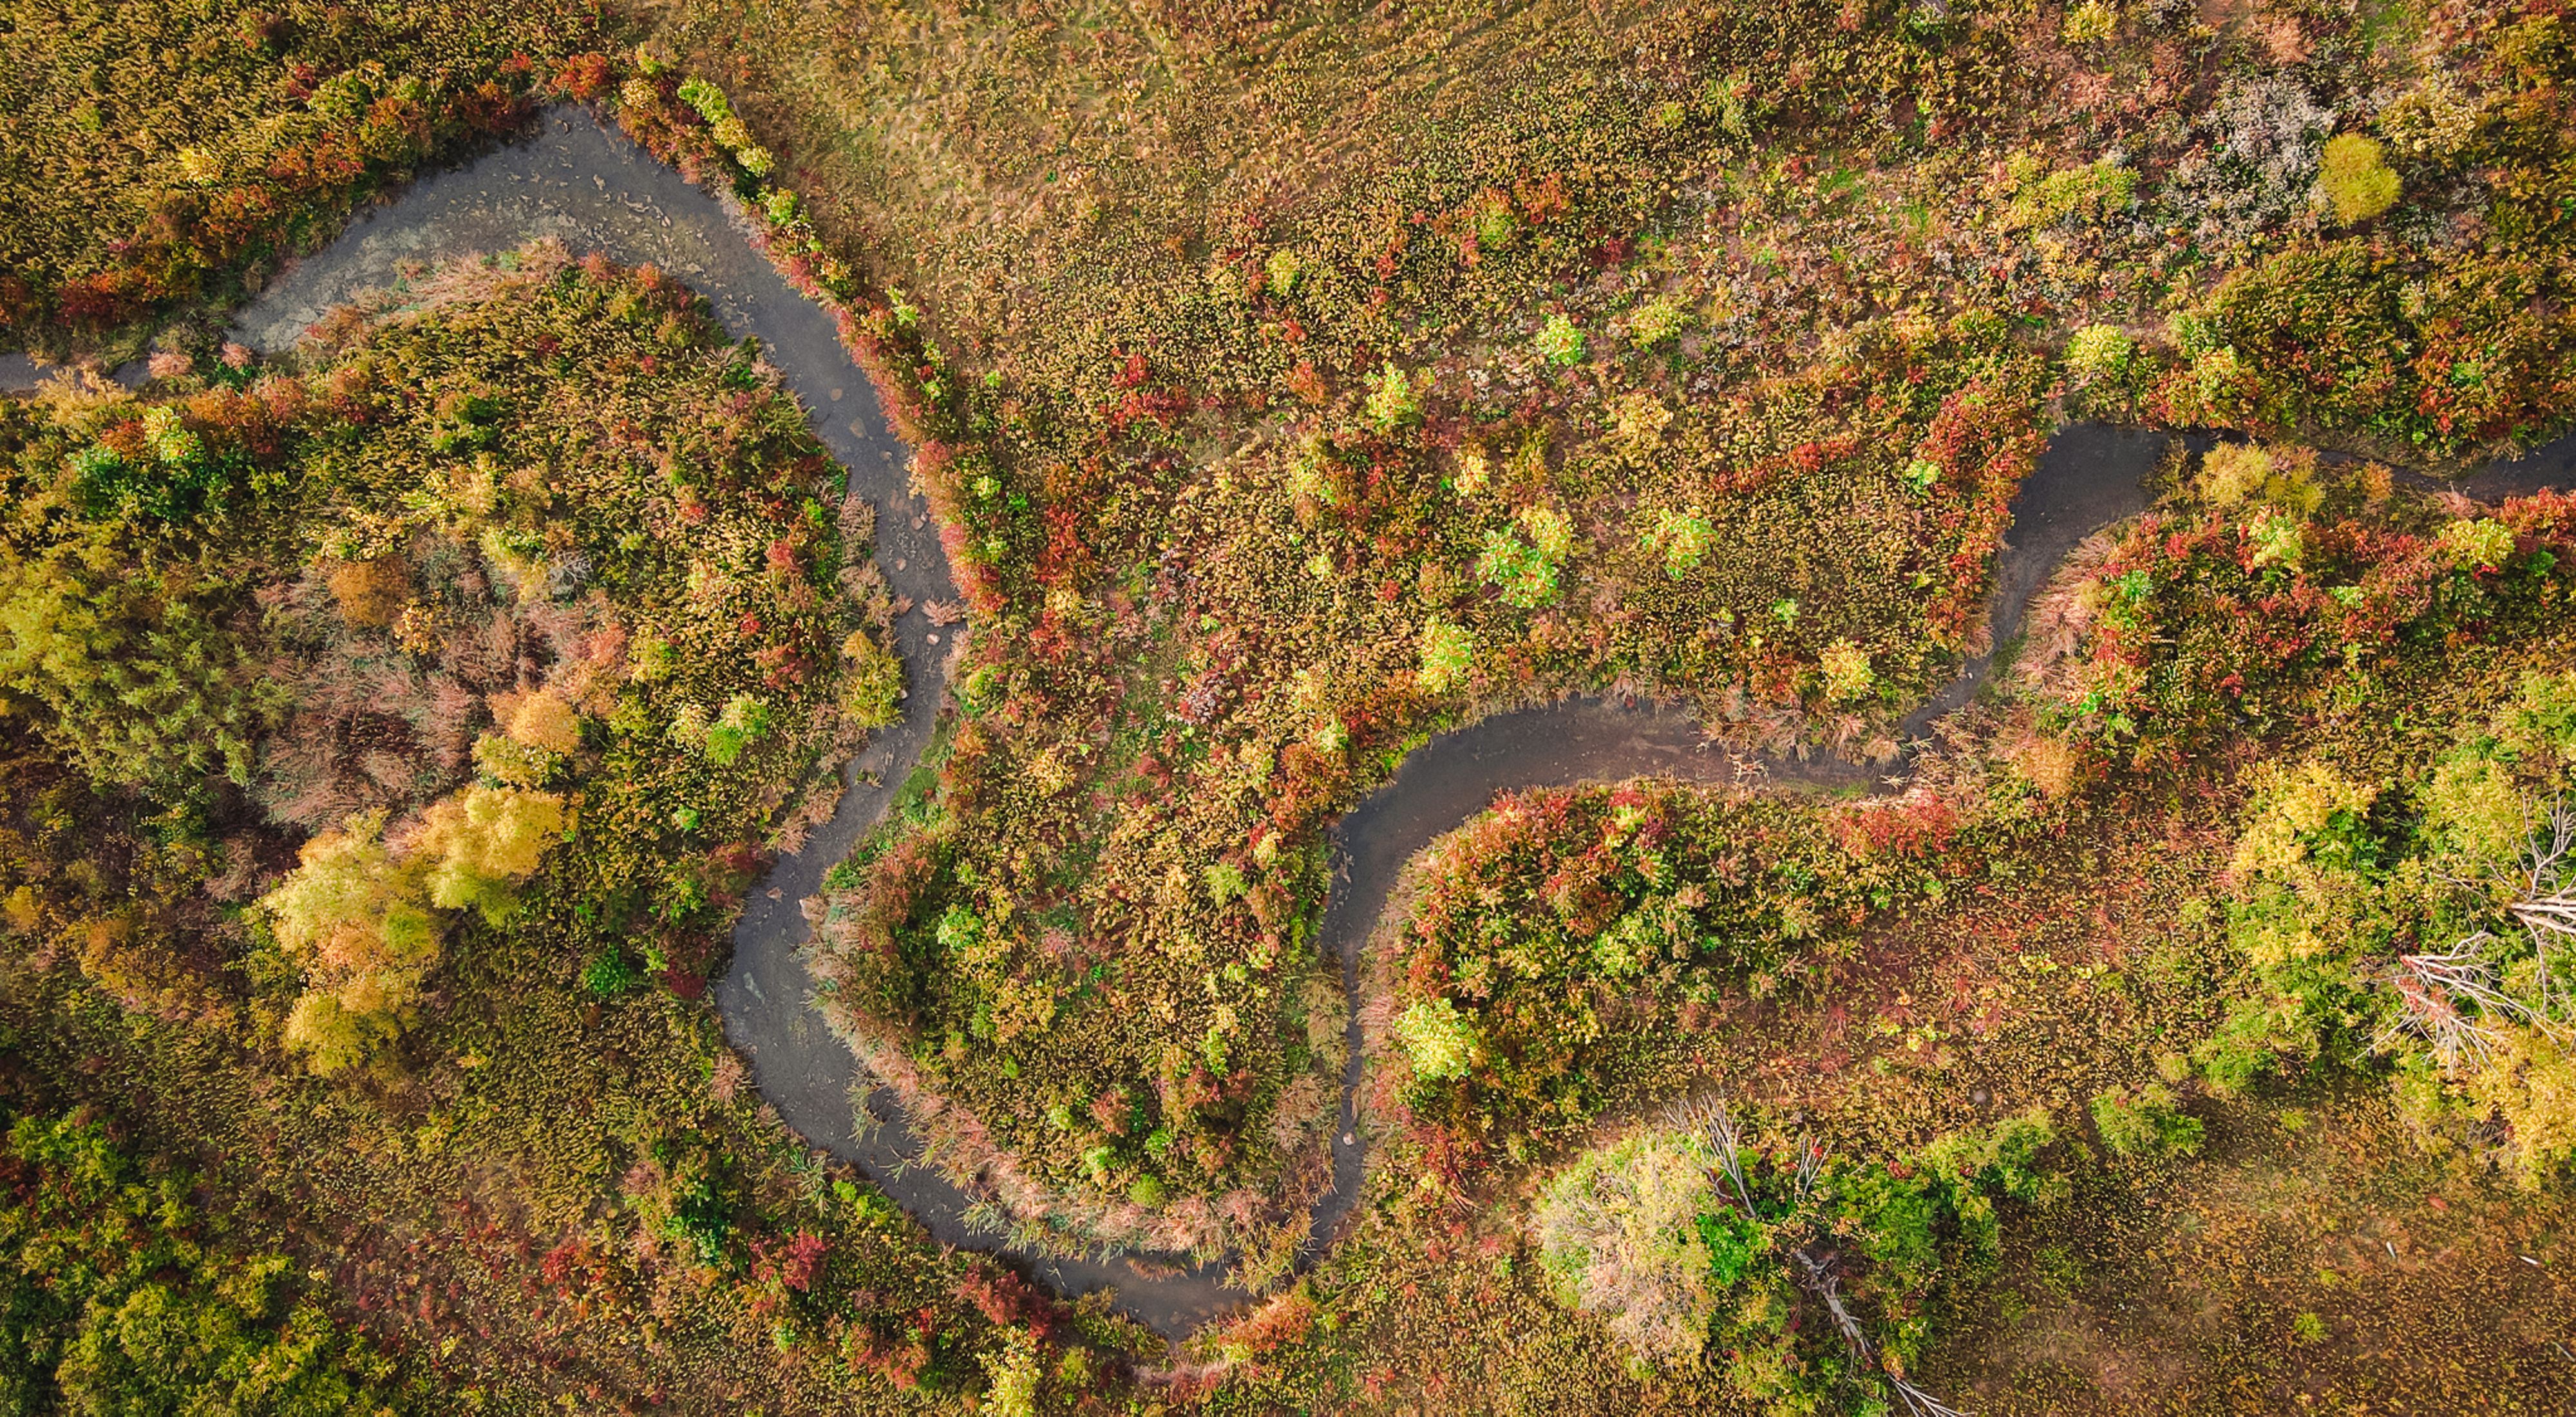 Aerial view of stream meandering across landscape of trees and meadows in autumn colors.